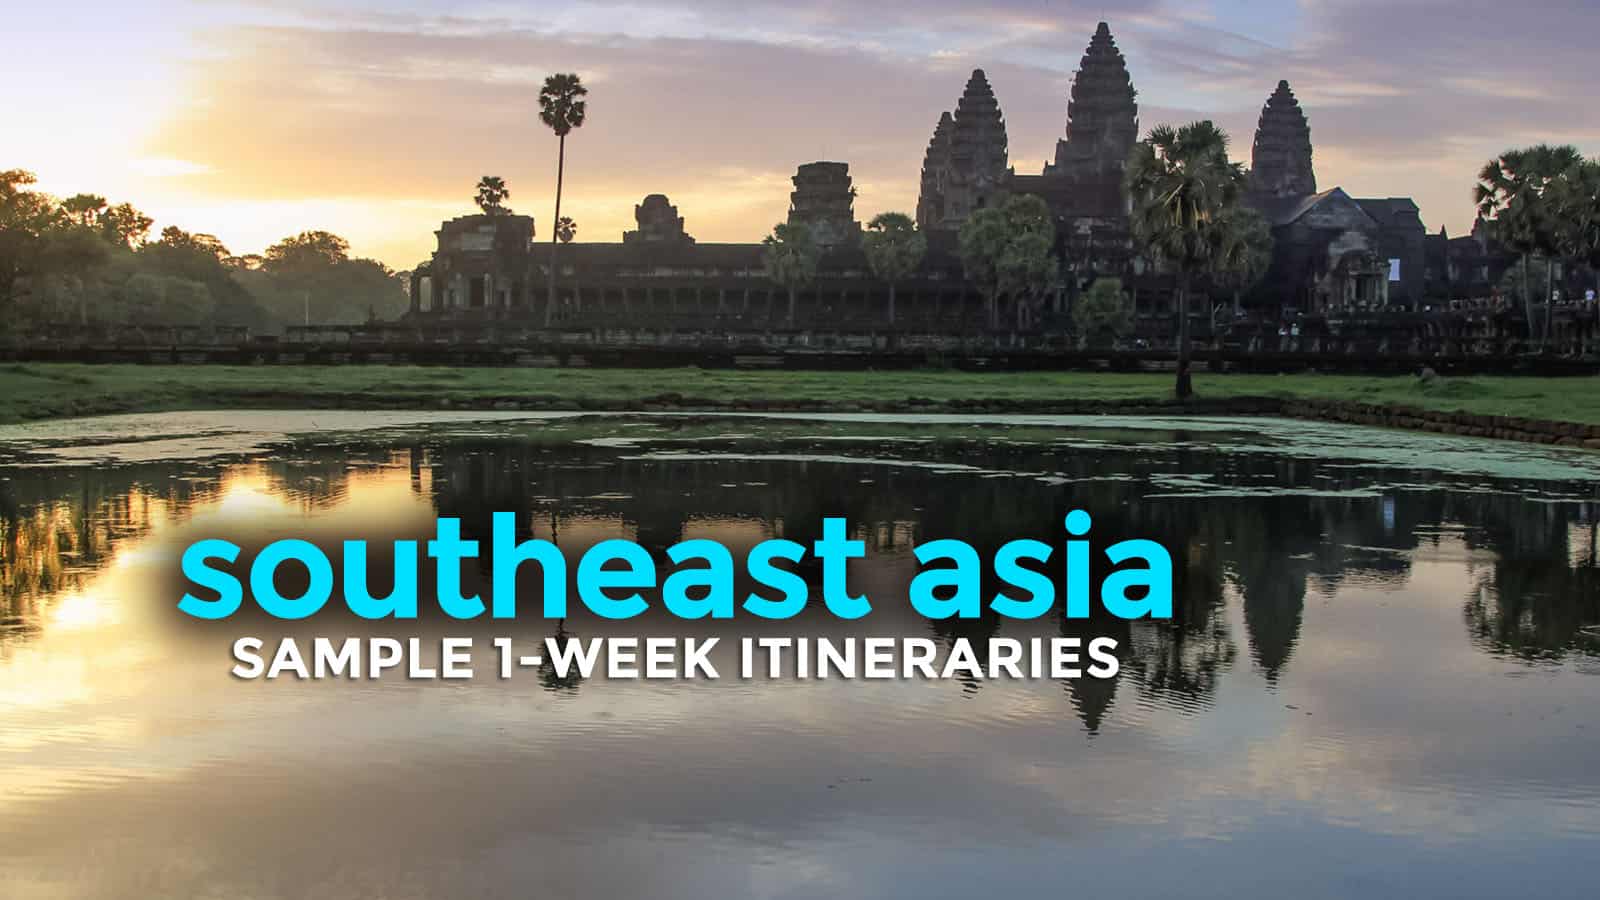 The ULTIMATE South East Asia Travel Guide, Away Lands